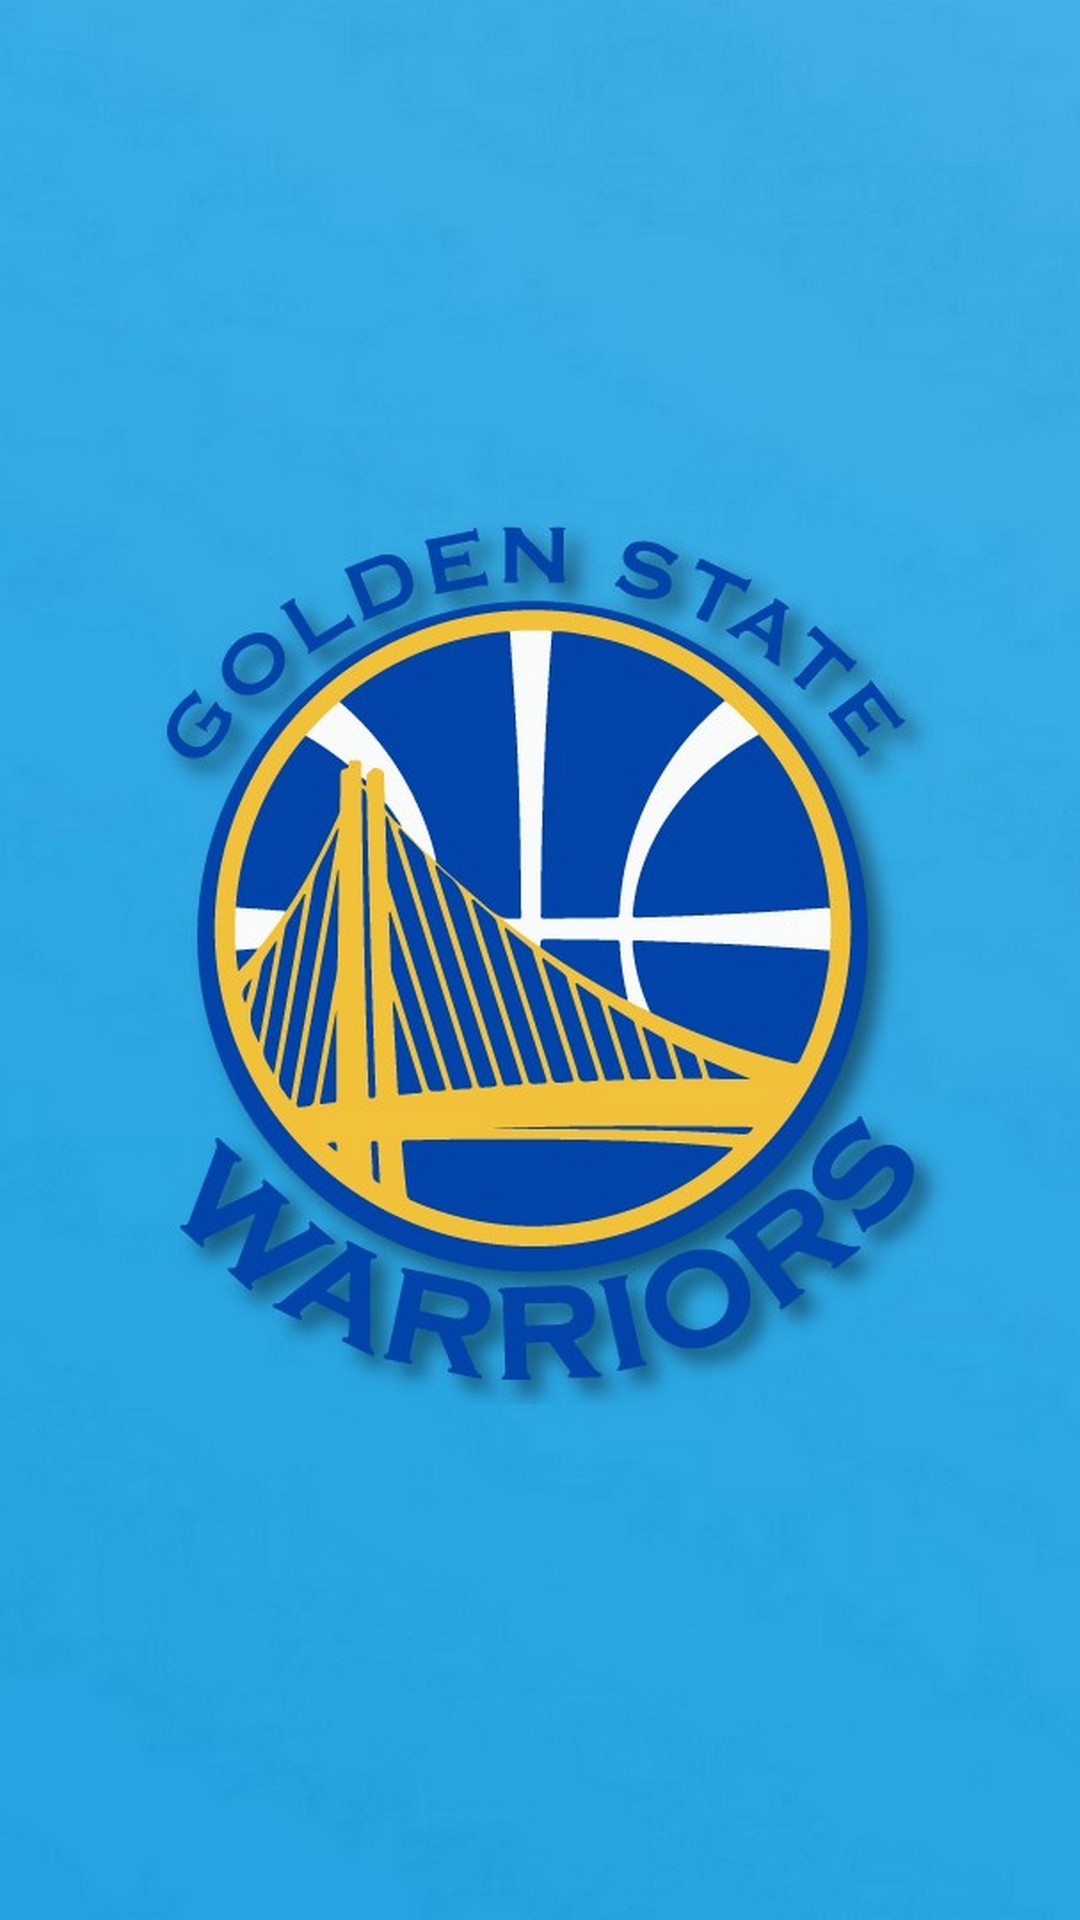 Wallpaper Mobile Golden State Warriors with image dimensions 1080X1920 pixel. You can make this wallpaper for your Desktop Computer Backgrounds, Windows or Mac Screensavers, iPhone Lock screen, Tablet or Android and another Mobile Phone device